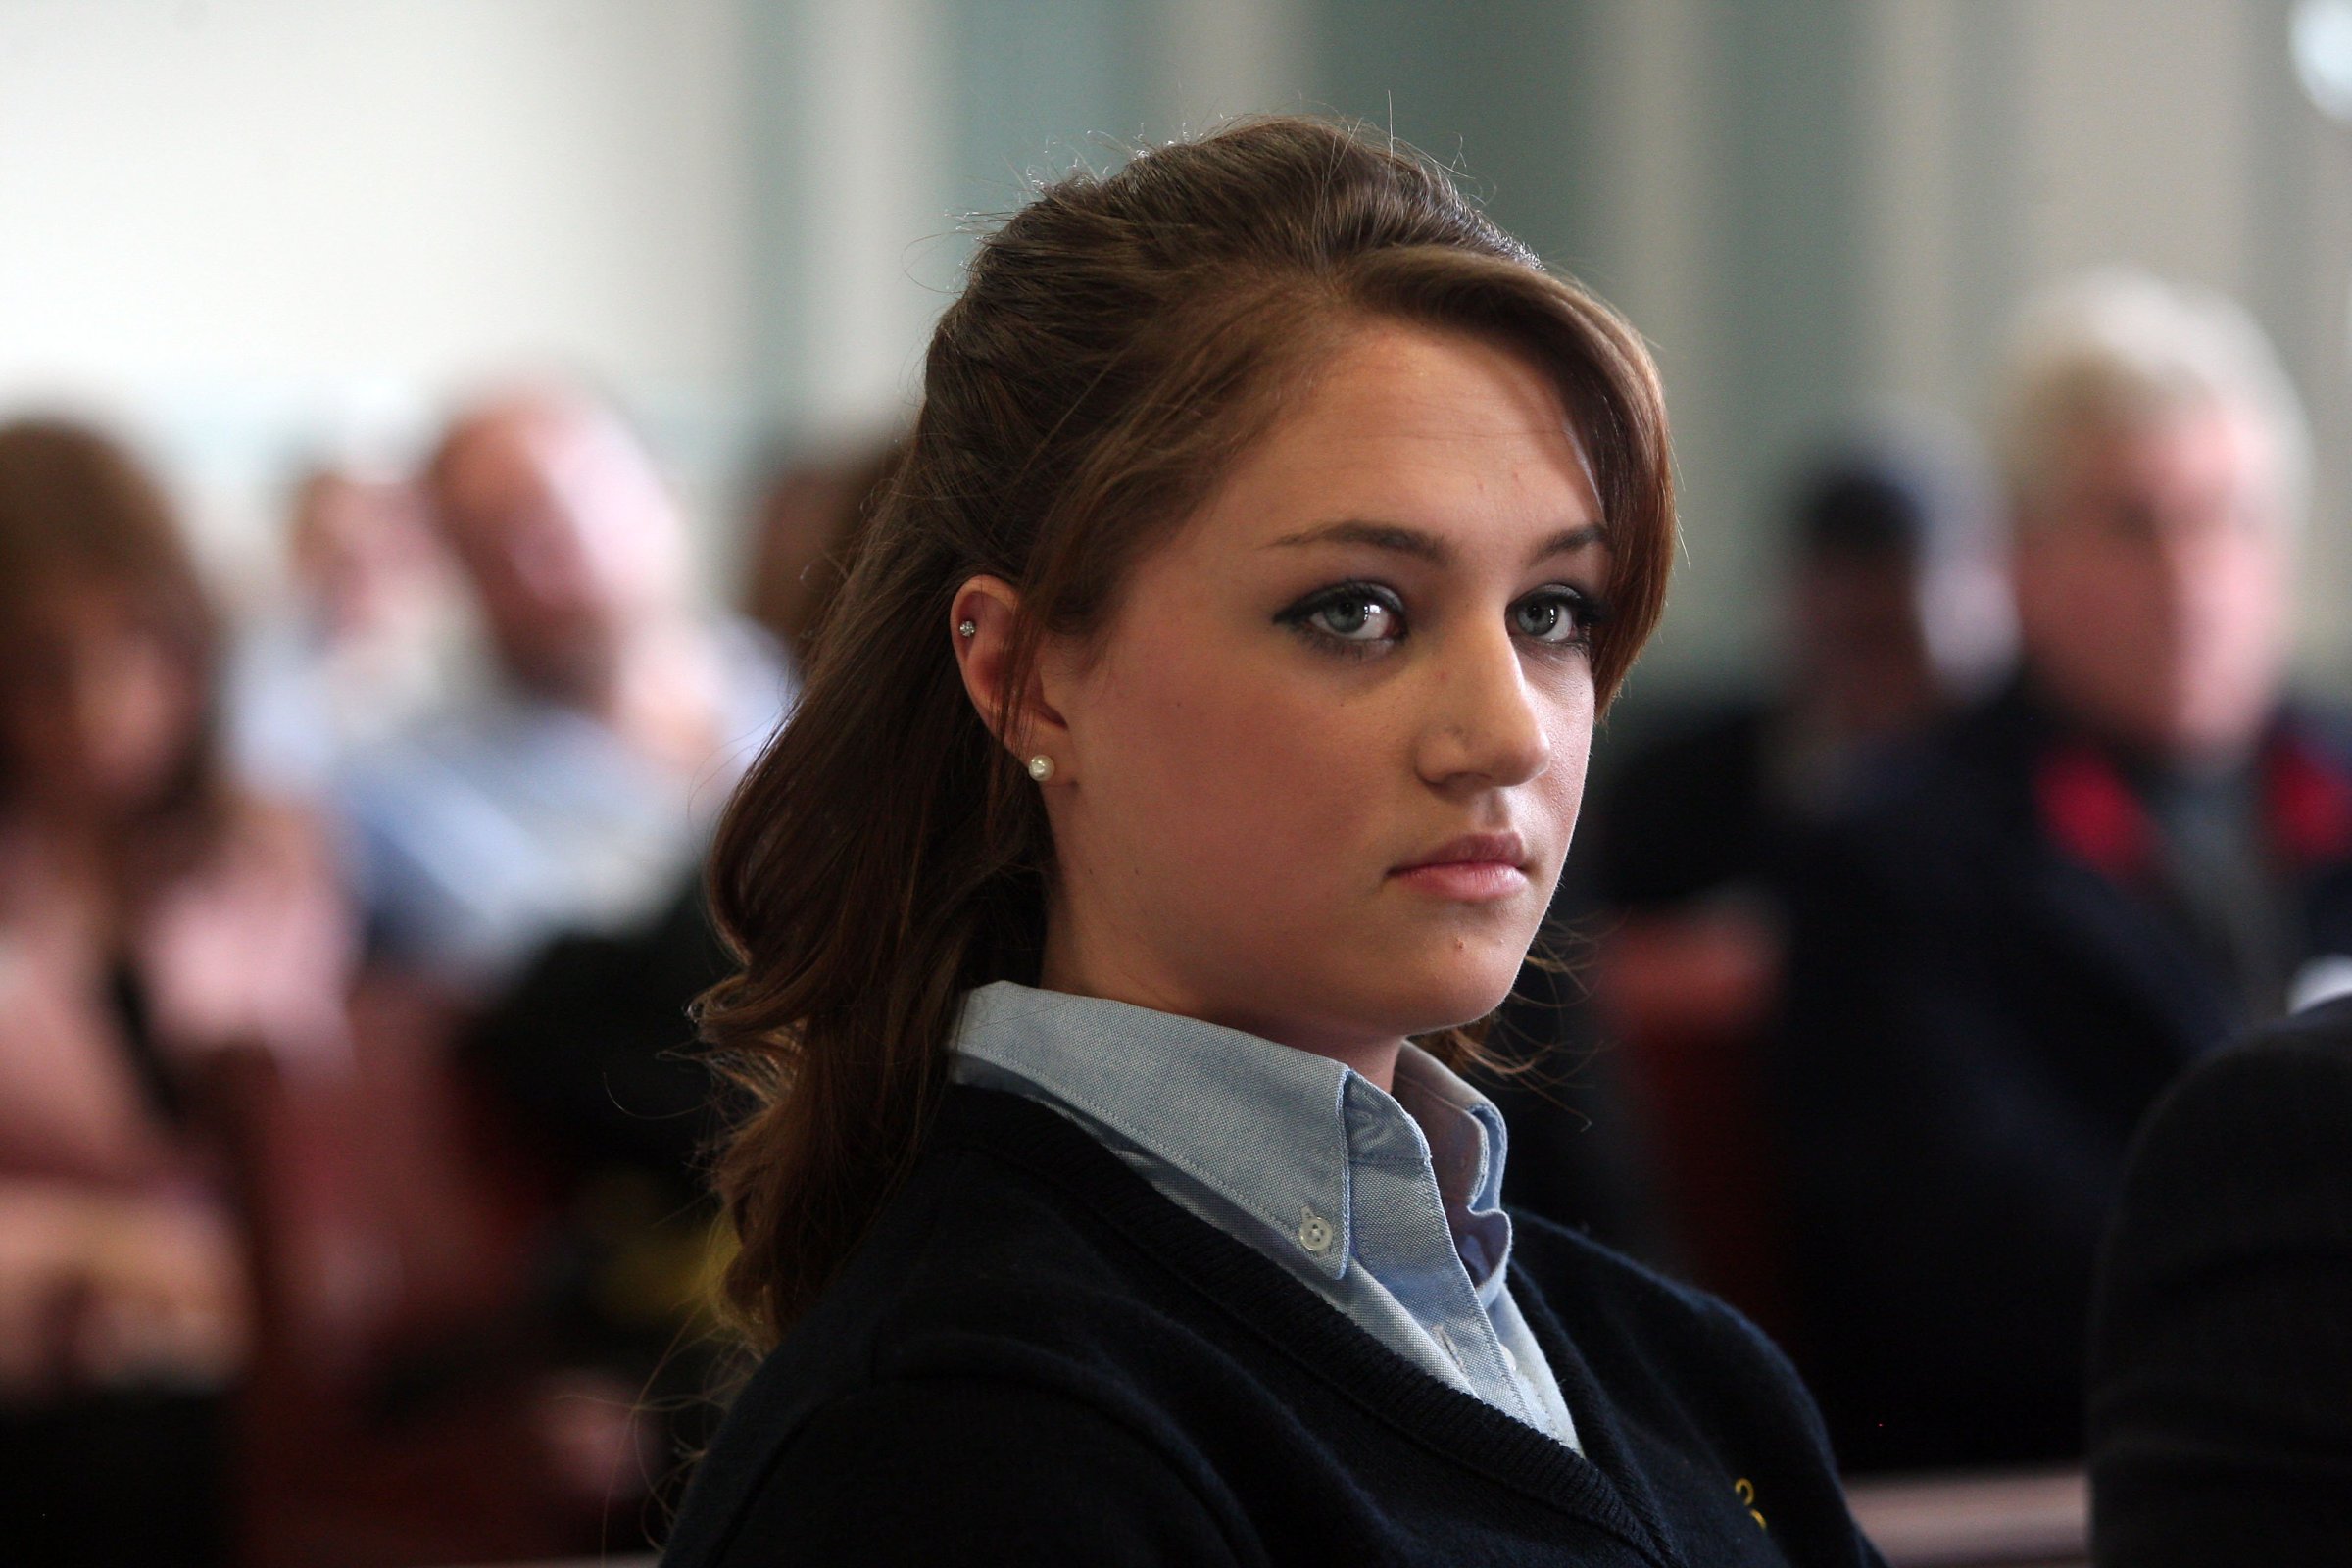 High school senior Rachel Canning, 18, appears in Morris County Superior Court in Morristown, N.J., on March 4, 2014.